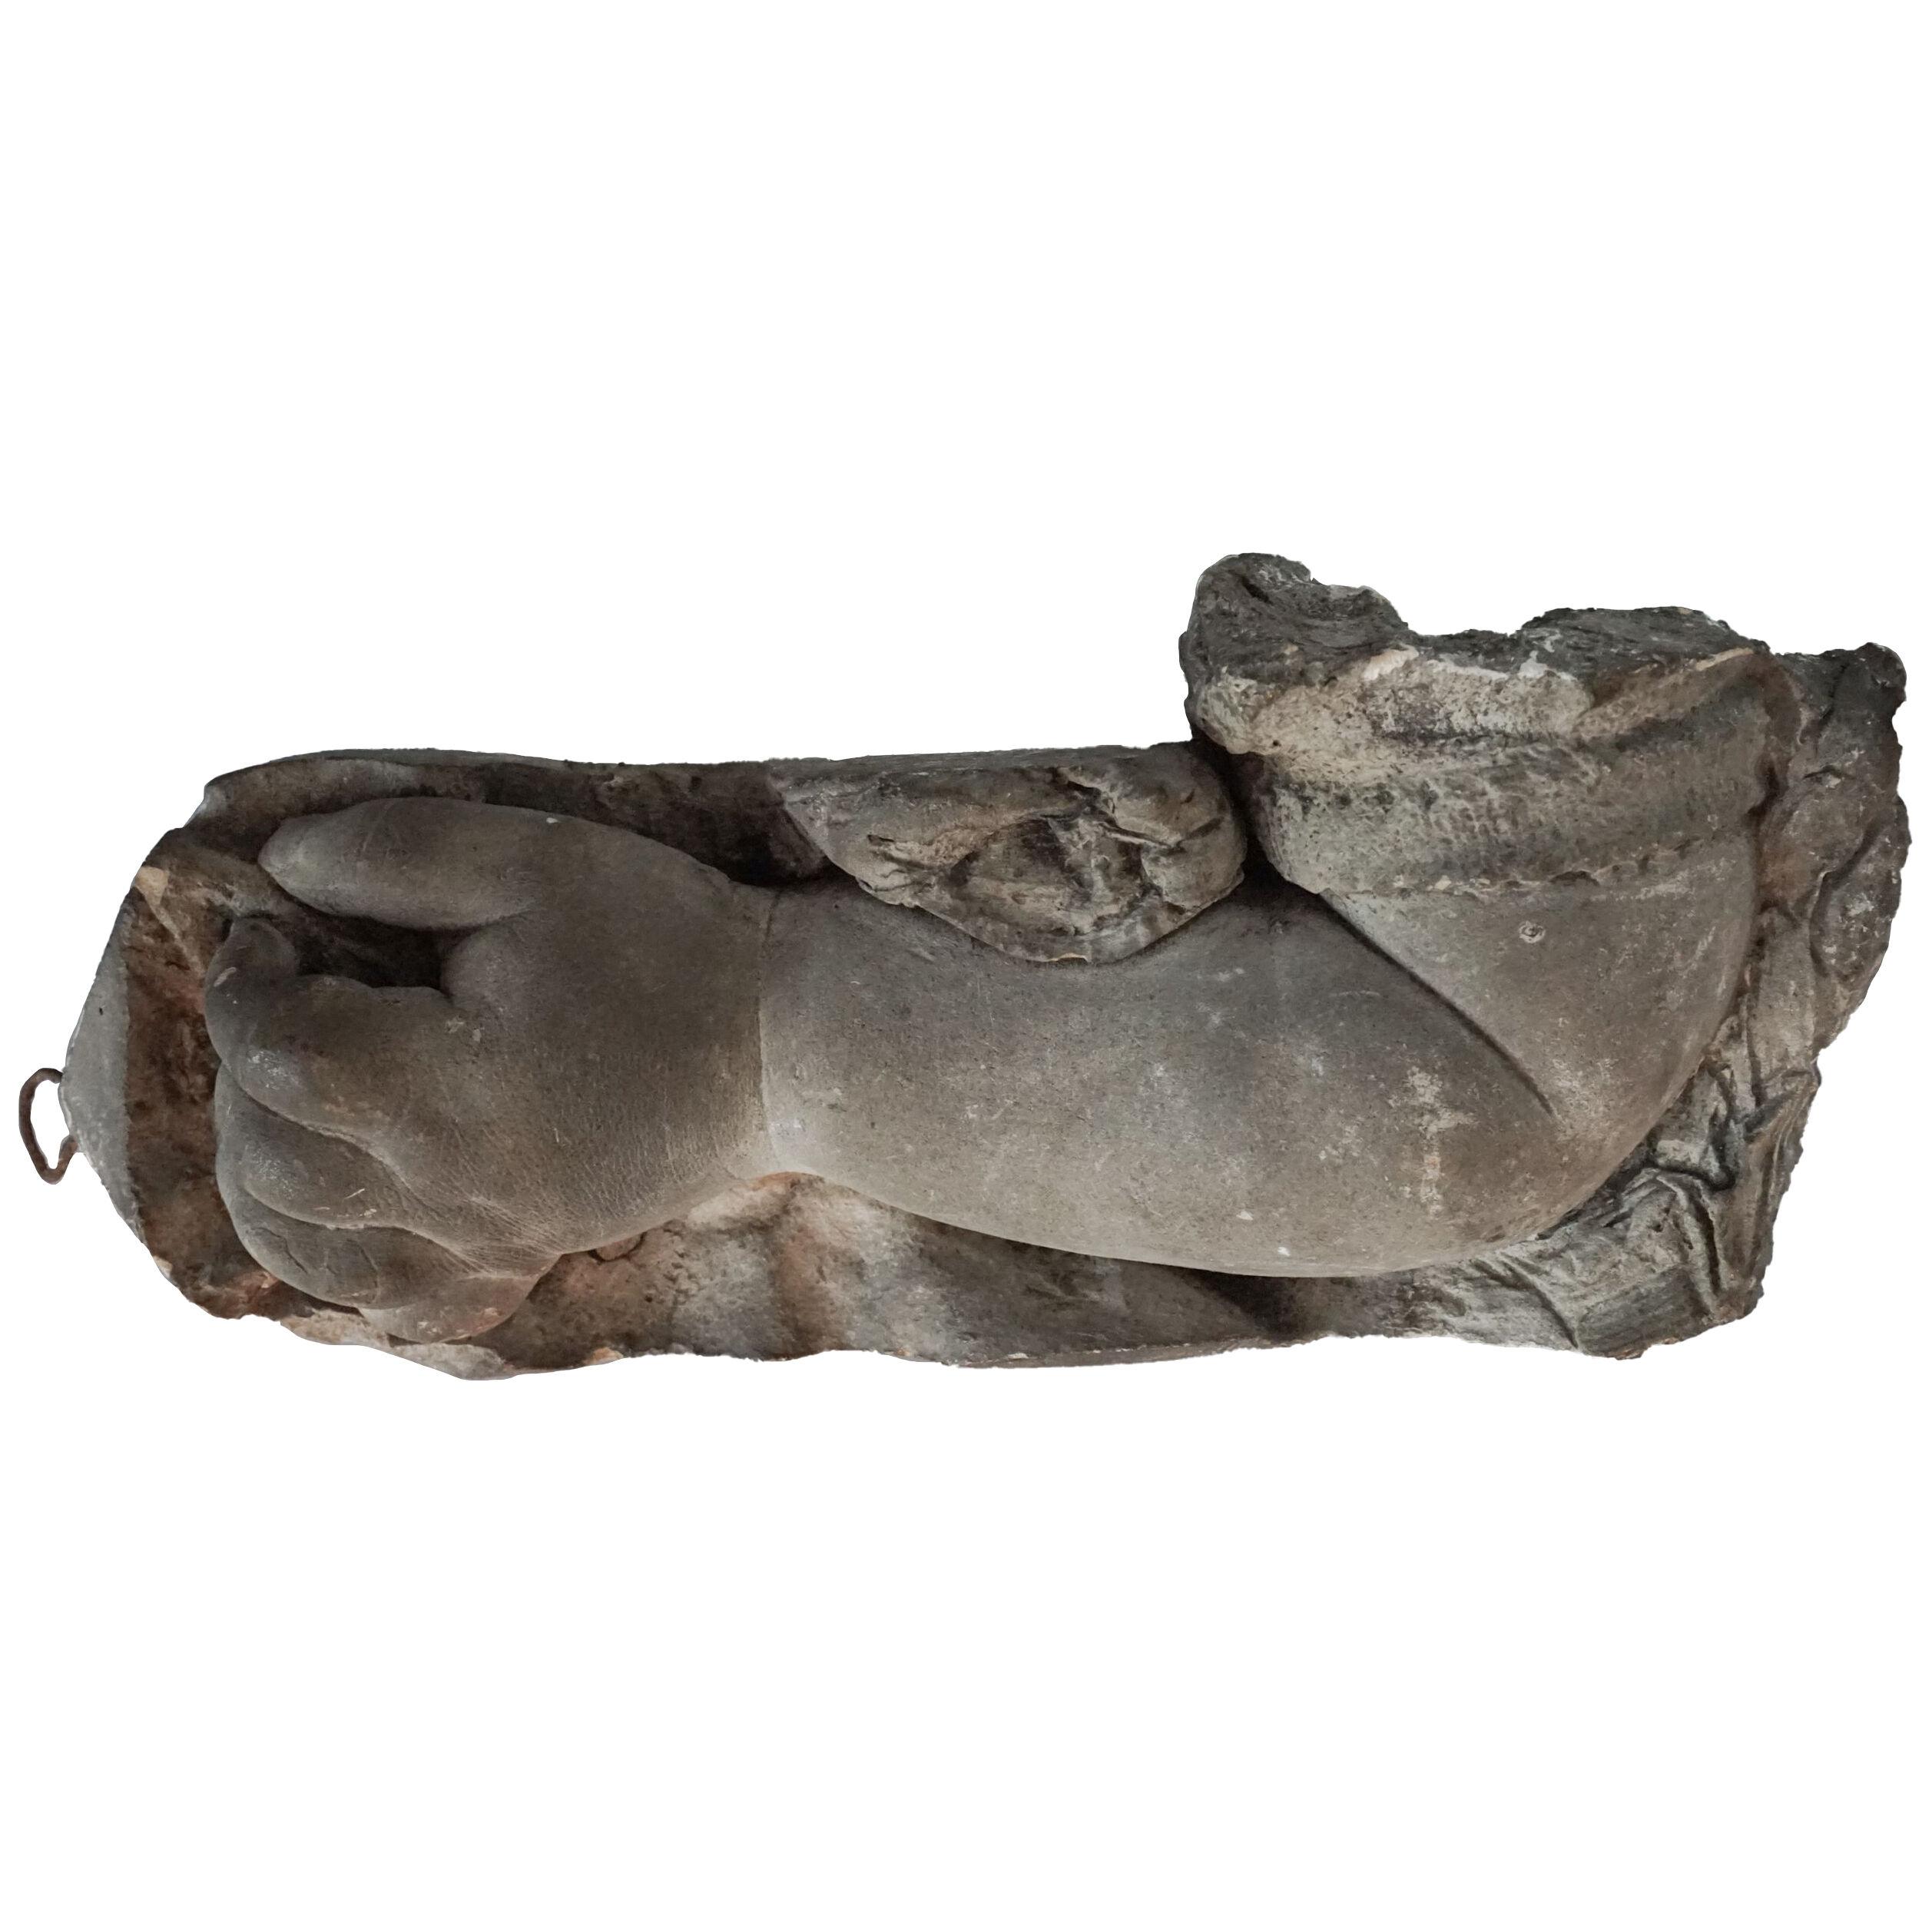 19th Century French Life Size Cast Plaster Study of Baby's Arm with Lace